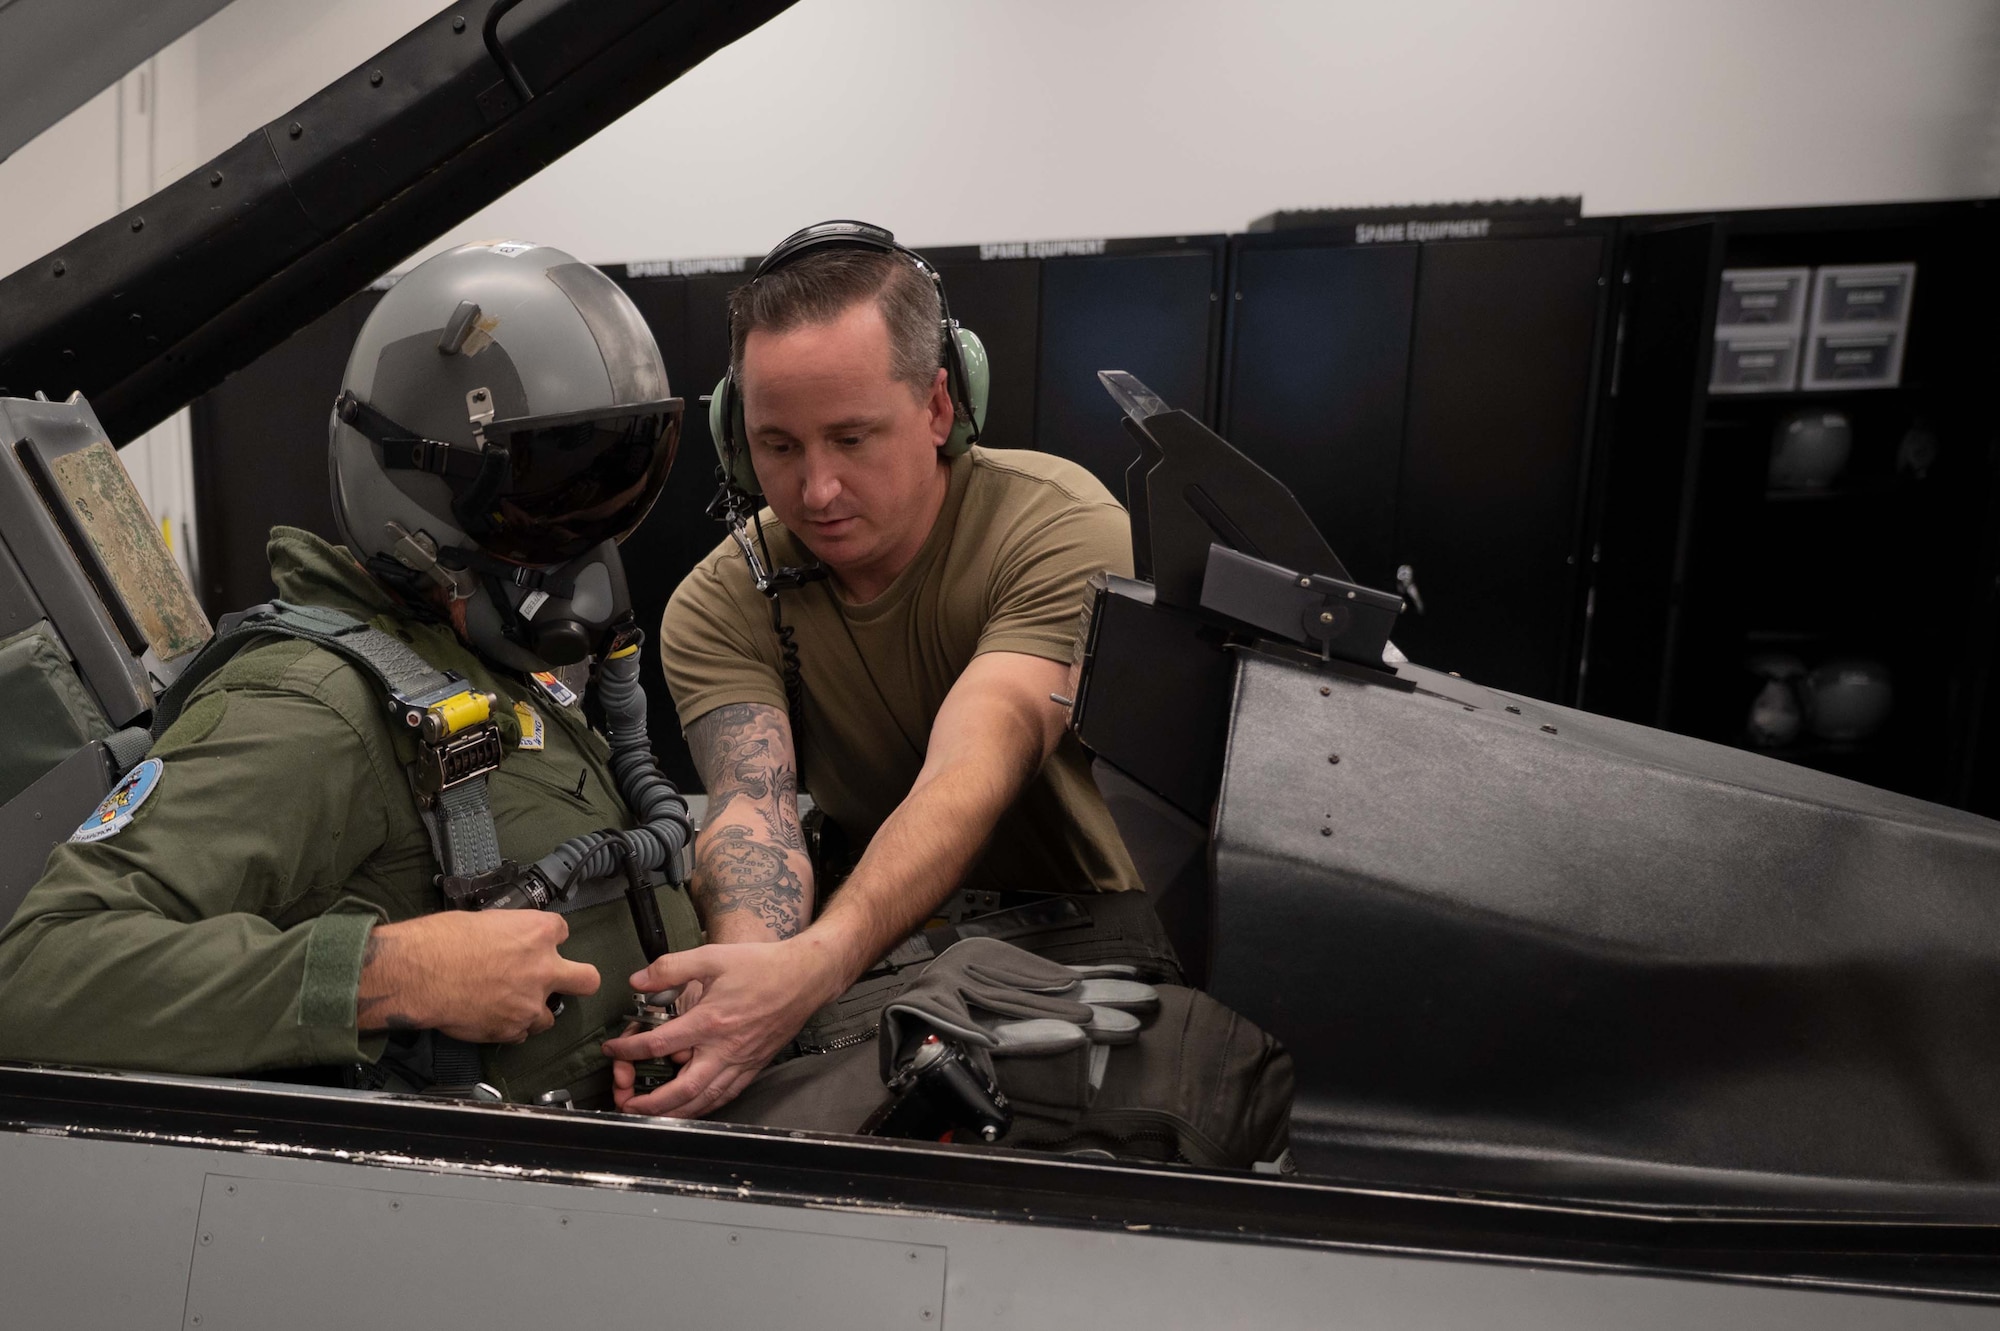 Chad Kasmar, Tucson Police Department Chief of Police, gets pre-flight instruction from 162nd Wing Aircrew Flight Equipment operators before taking flight in an F-16 with Col. Brant Putnam, the 162nd Wing Vice Commander, as his pilot. (U.S. Air Force photo by Maj. Angela Walz)